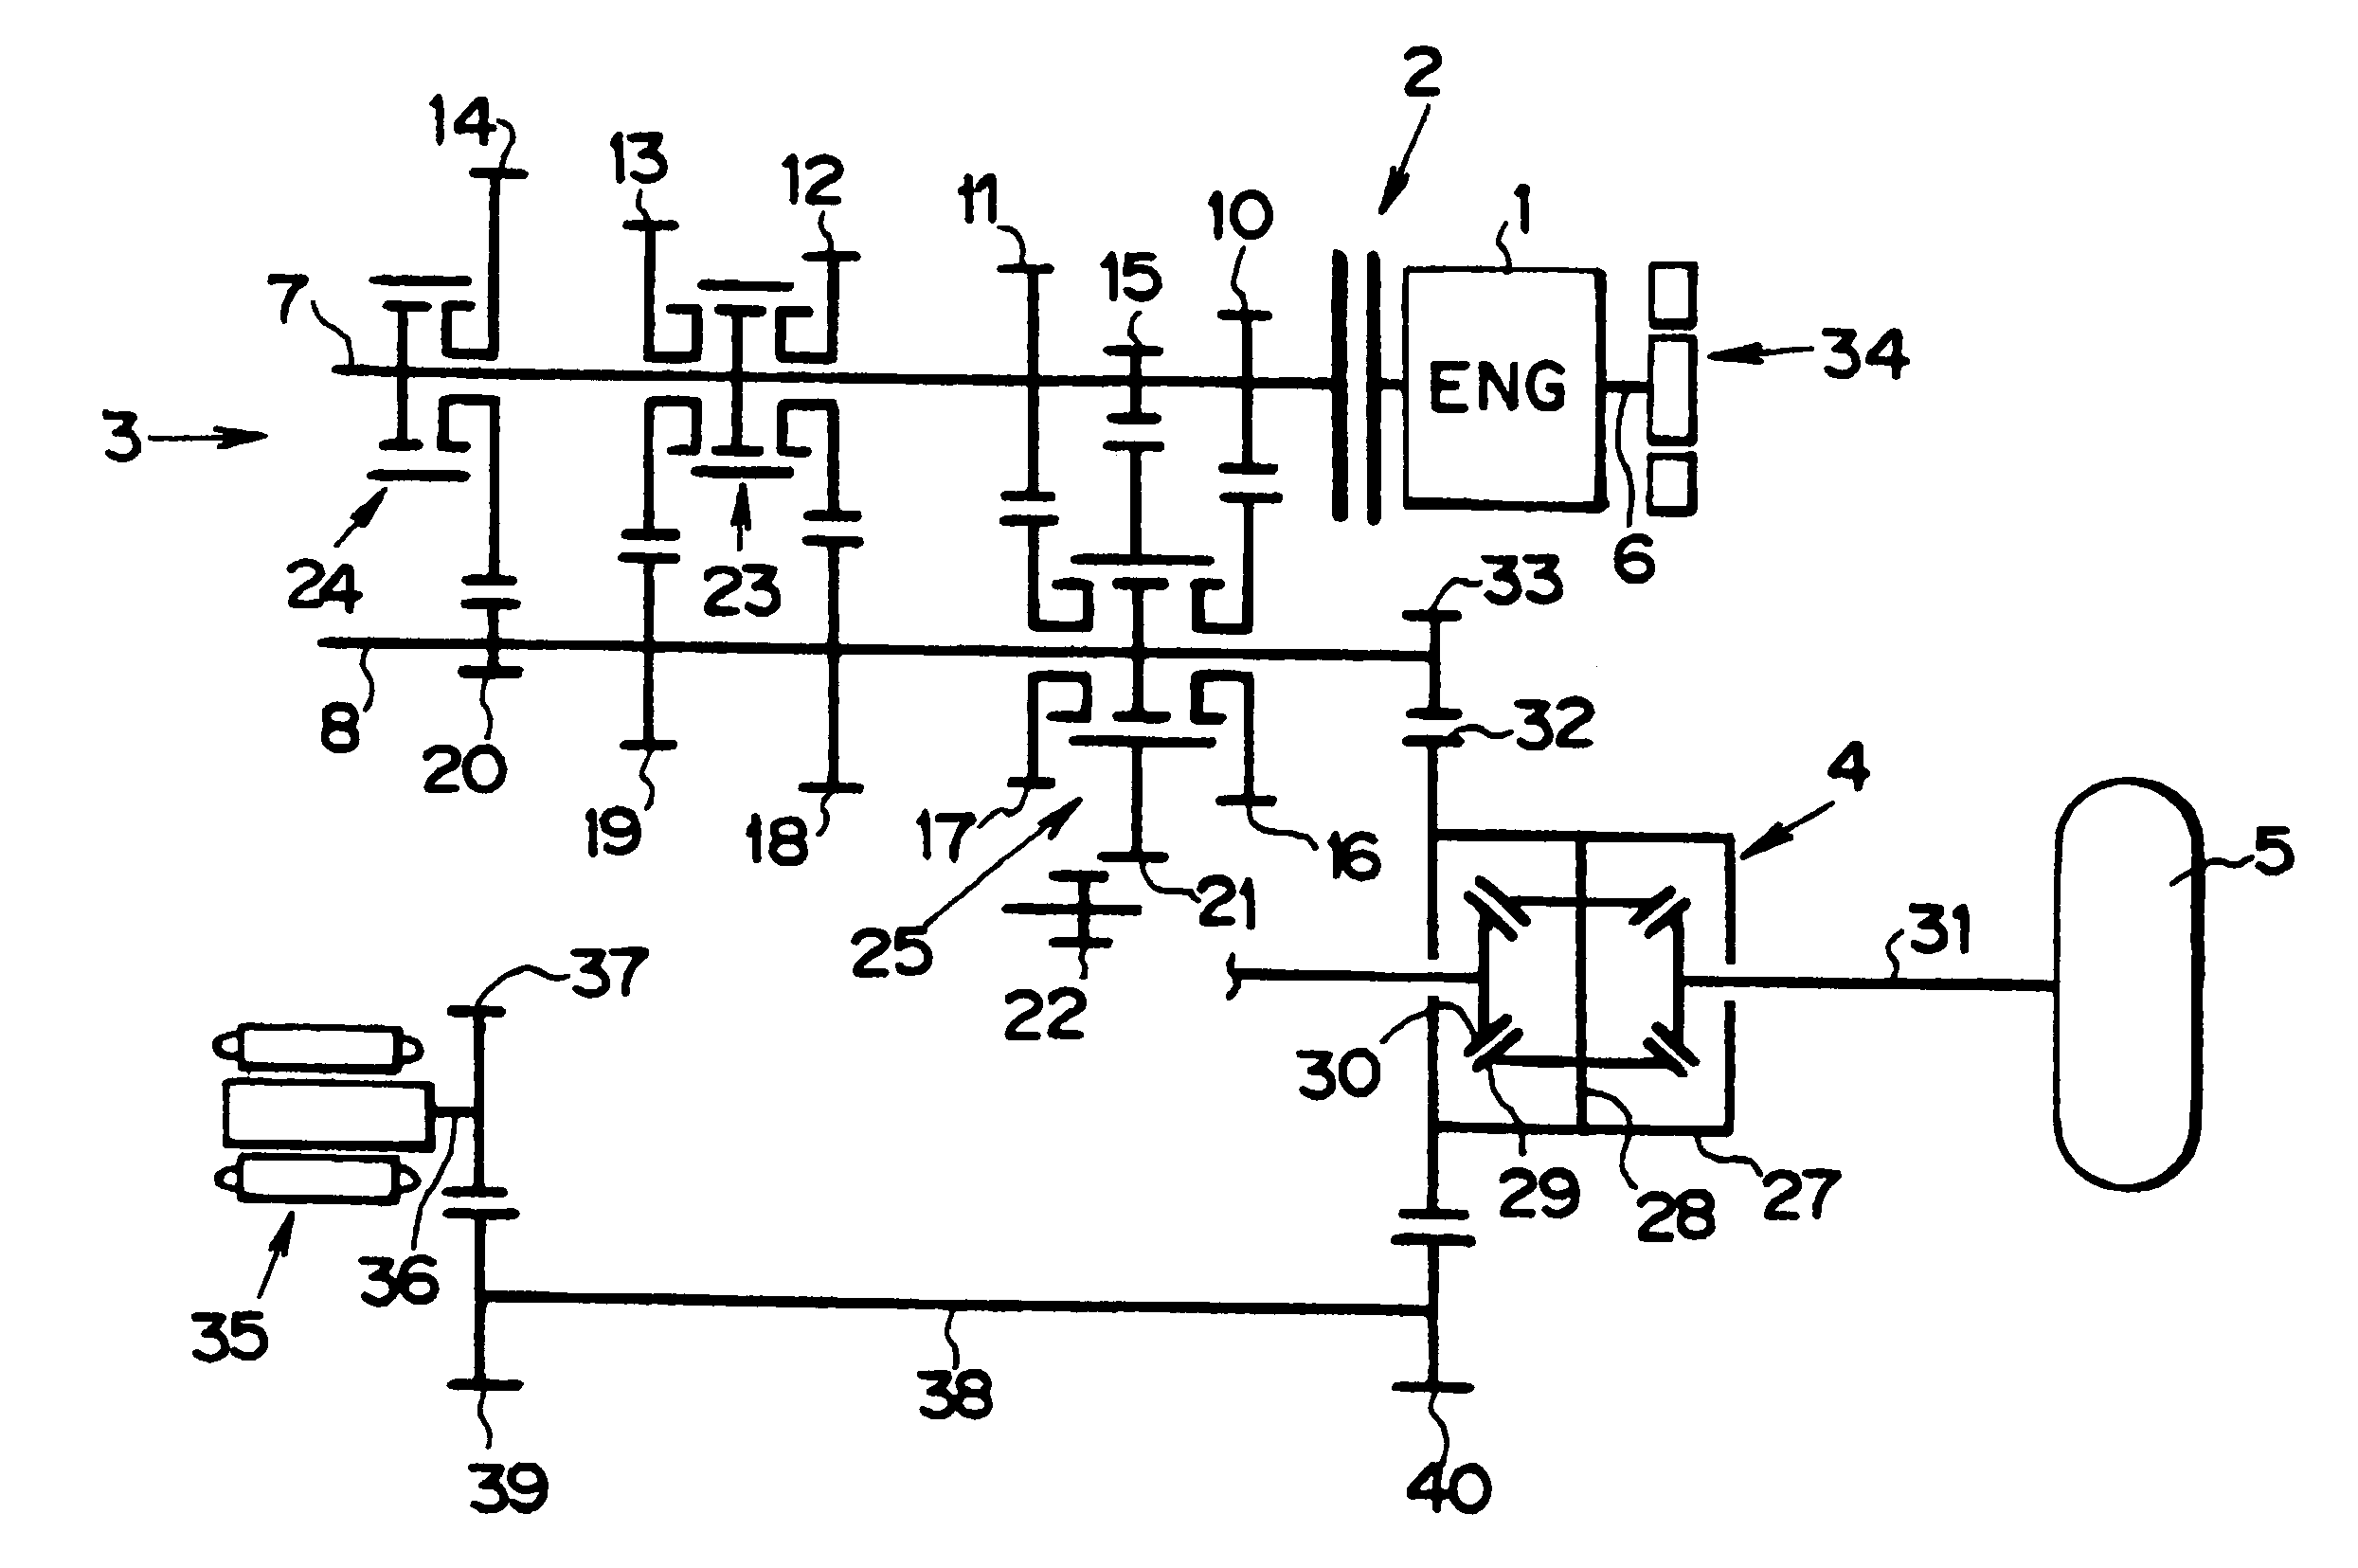 Shift control system for hybrid vehicles